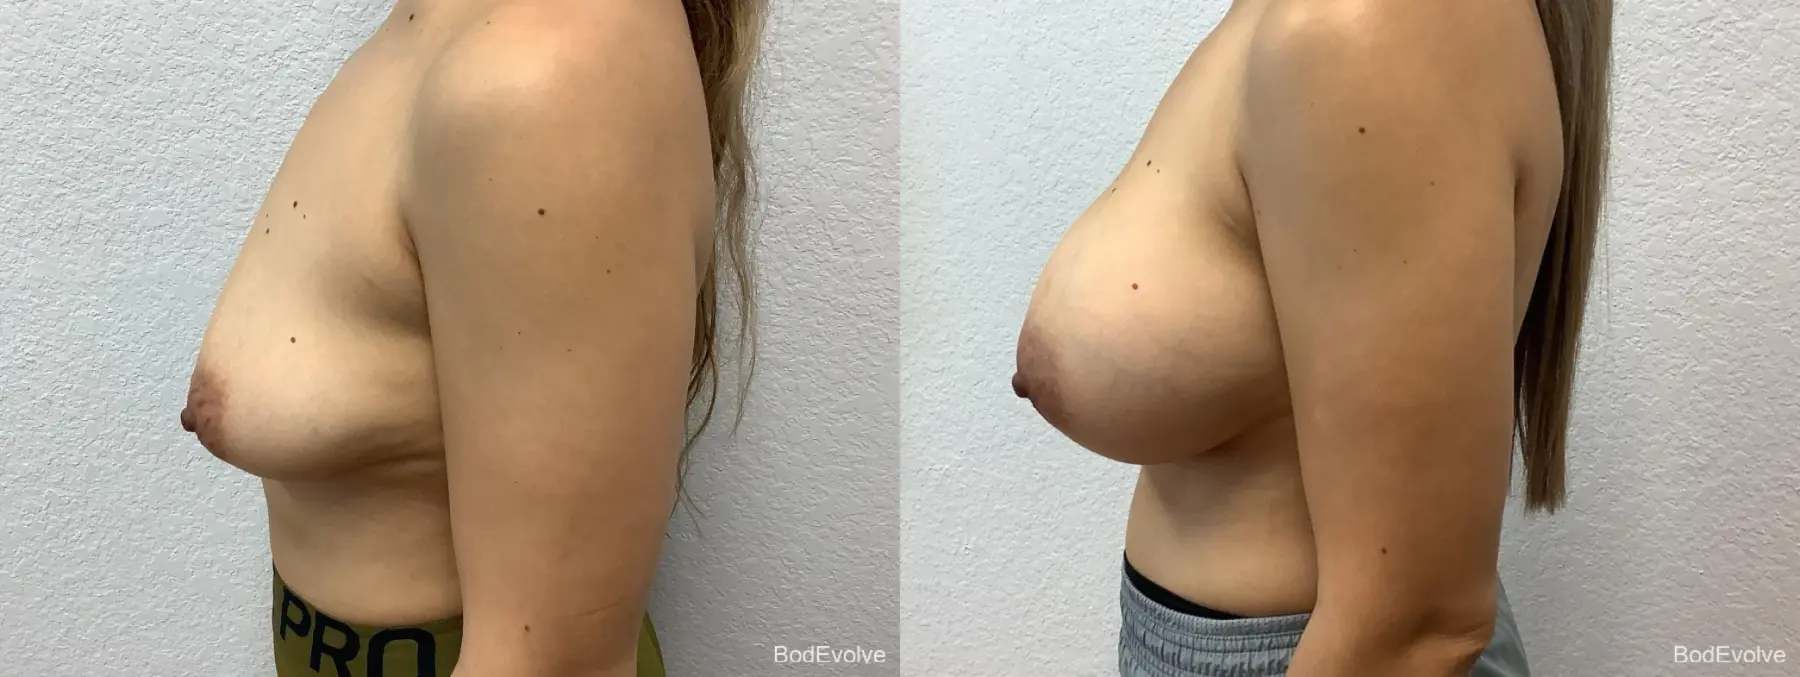 Breast Augmentation: Patient 5 - Before and After 3